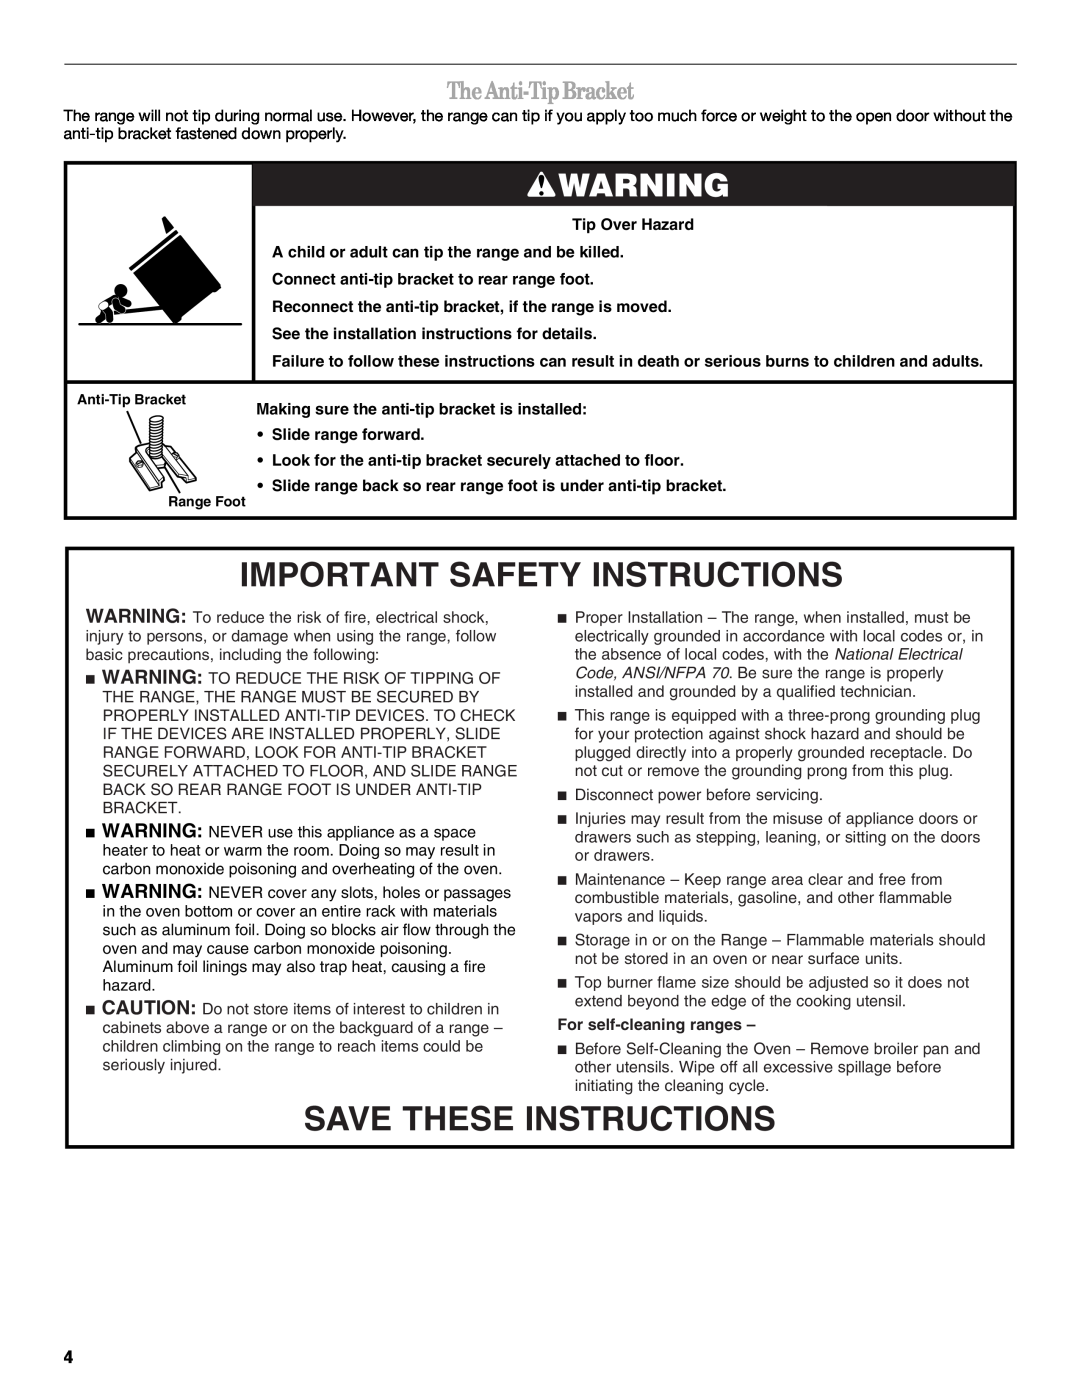 Amana W10181330A Important Safety Instructions, Save These Instructions, TheAnti-TipBracket, For self-cleaning ranges 